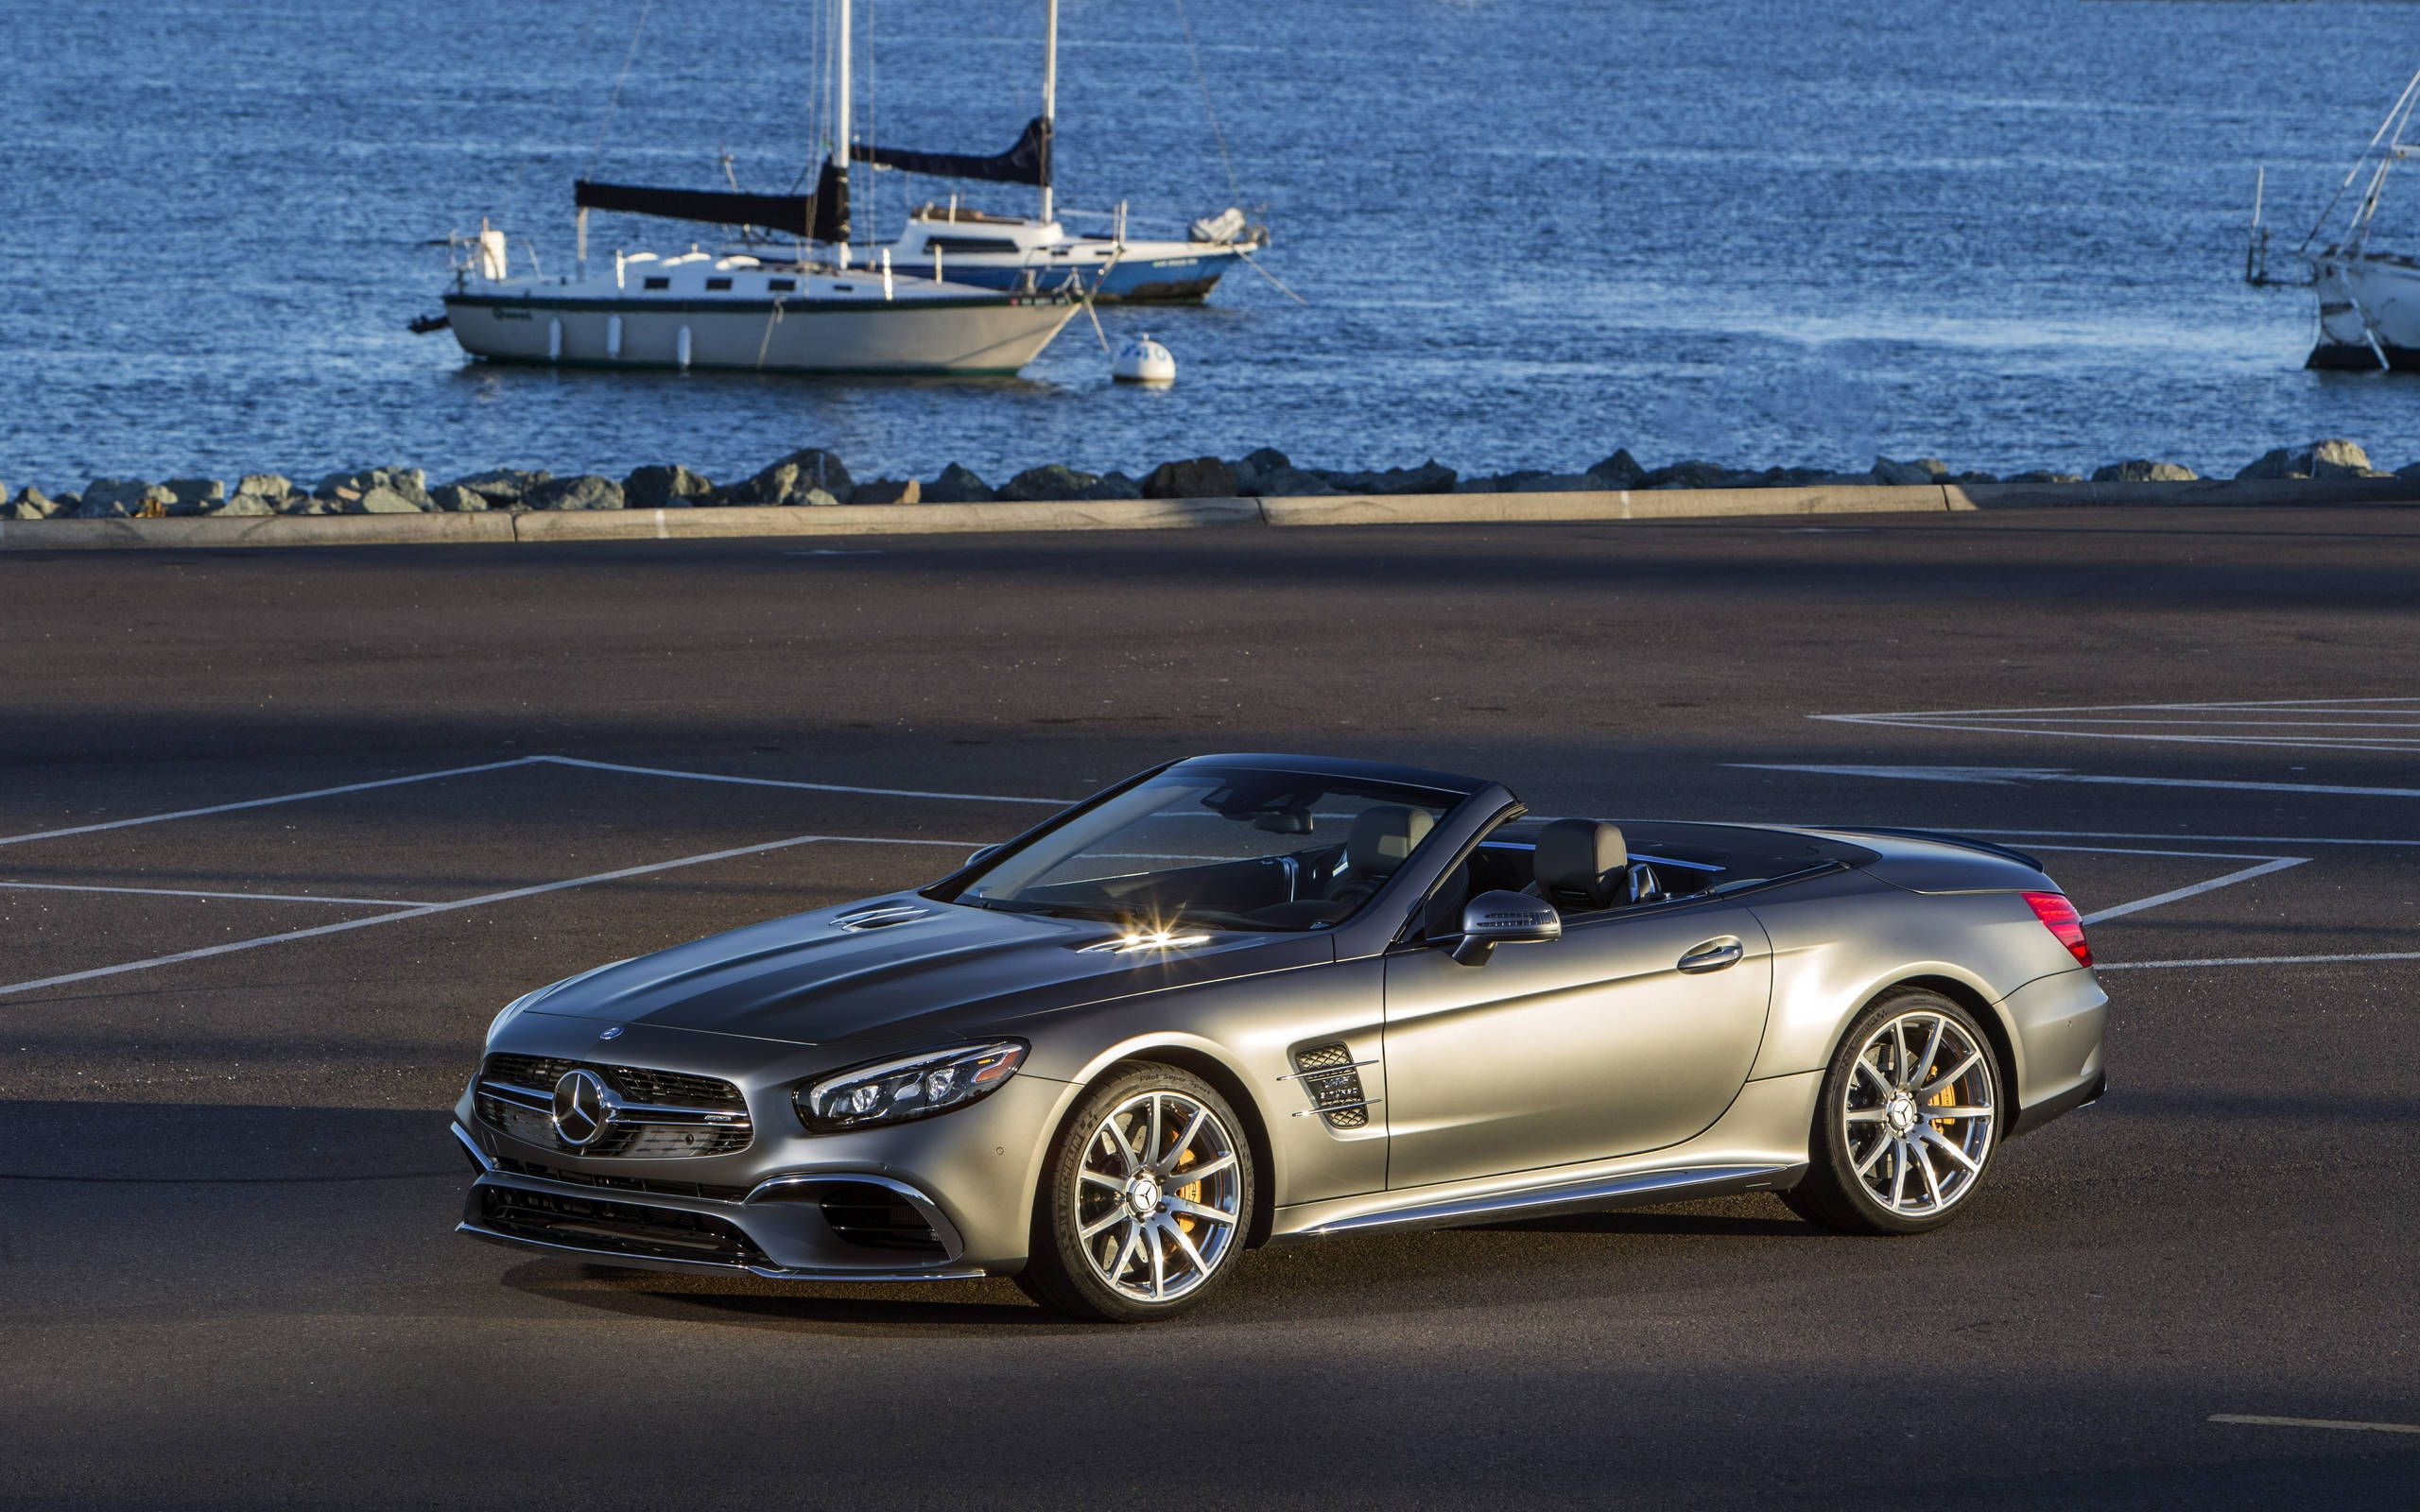 2017 Mercedes-AMG SL65 review: Over the top